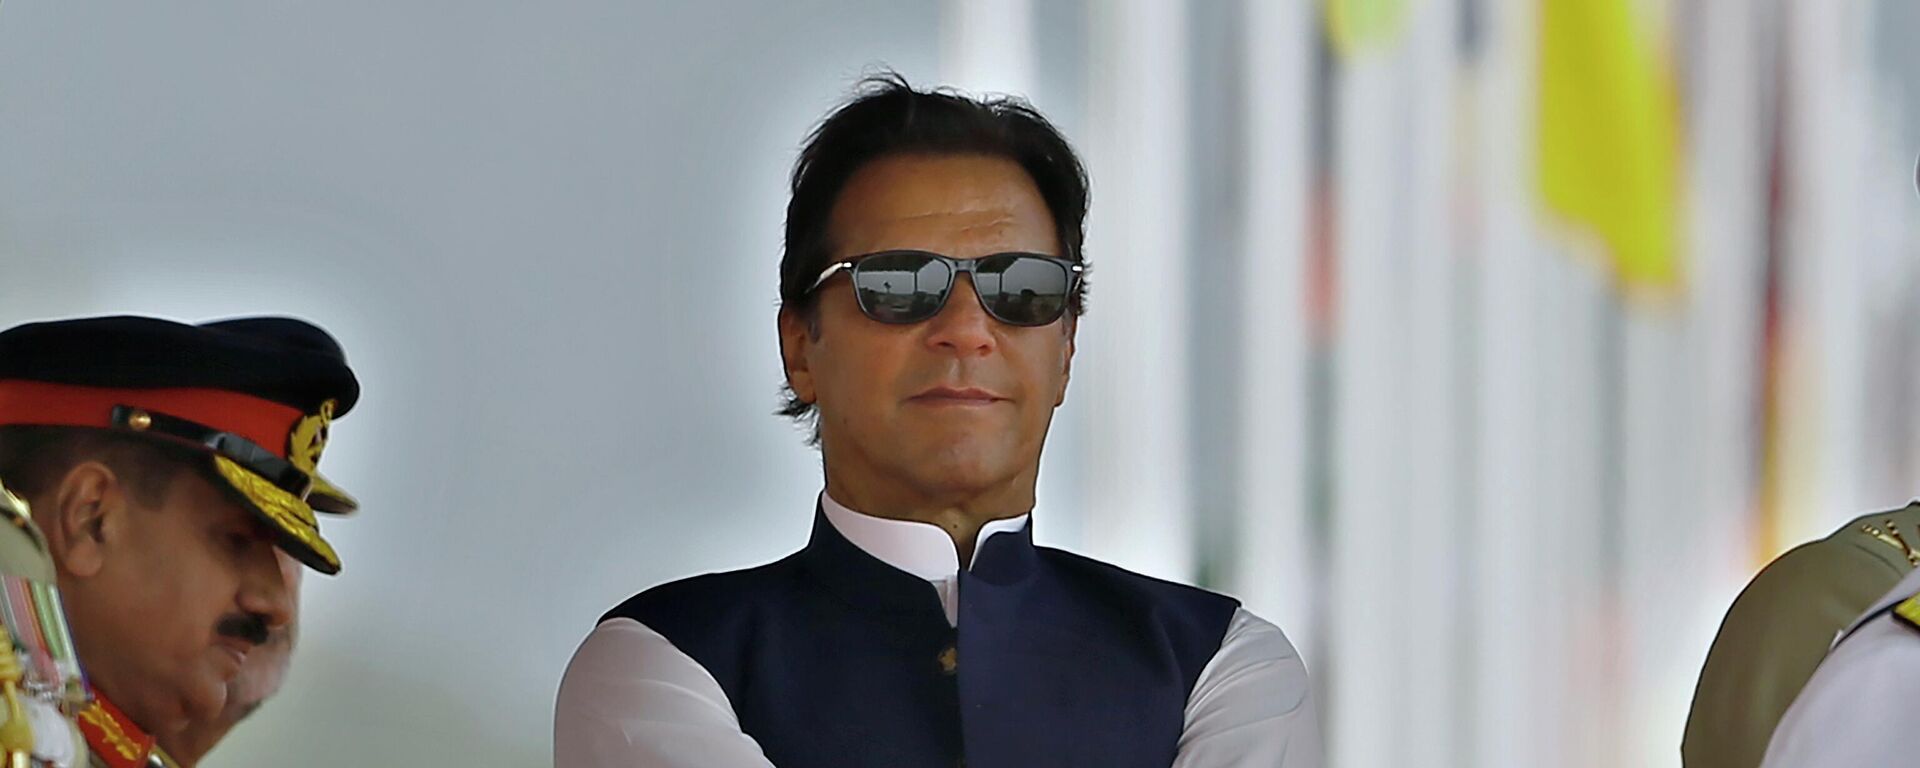 Pakistan's Prime Minister Imran Khan attends a military parade to mark Pakistan National Day, in Islamabad, Pakistan, Wednesday, March 23, 2022. - Sputnik International, 1920, 24.04.2022